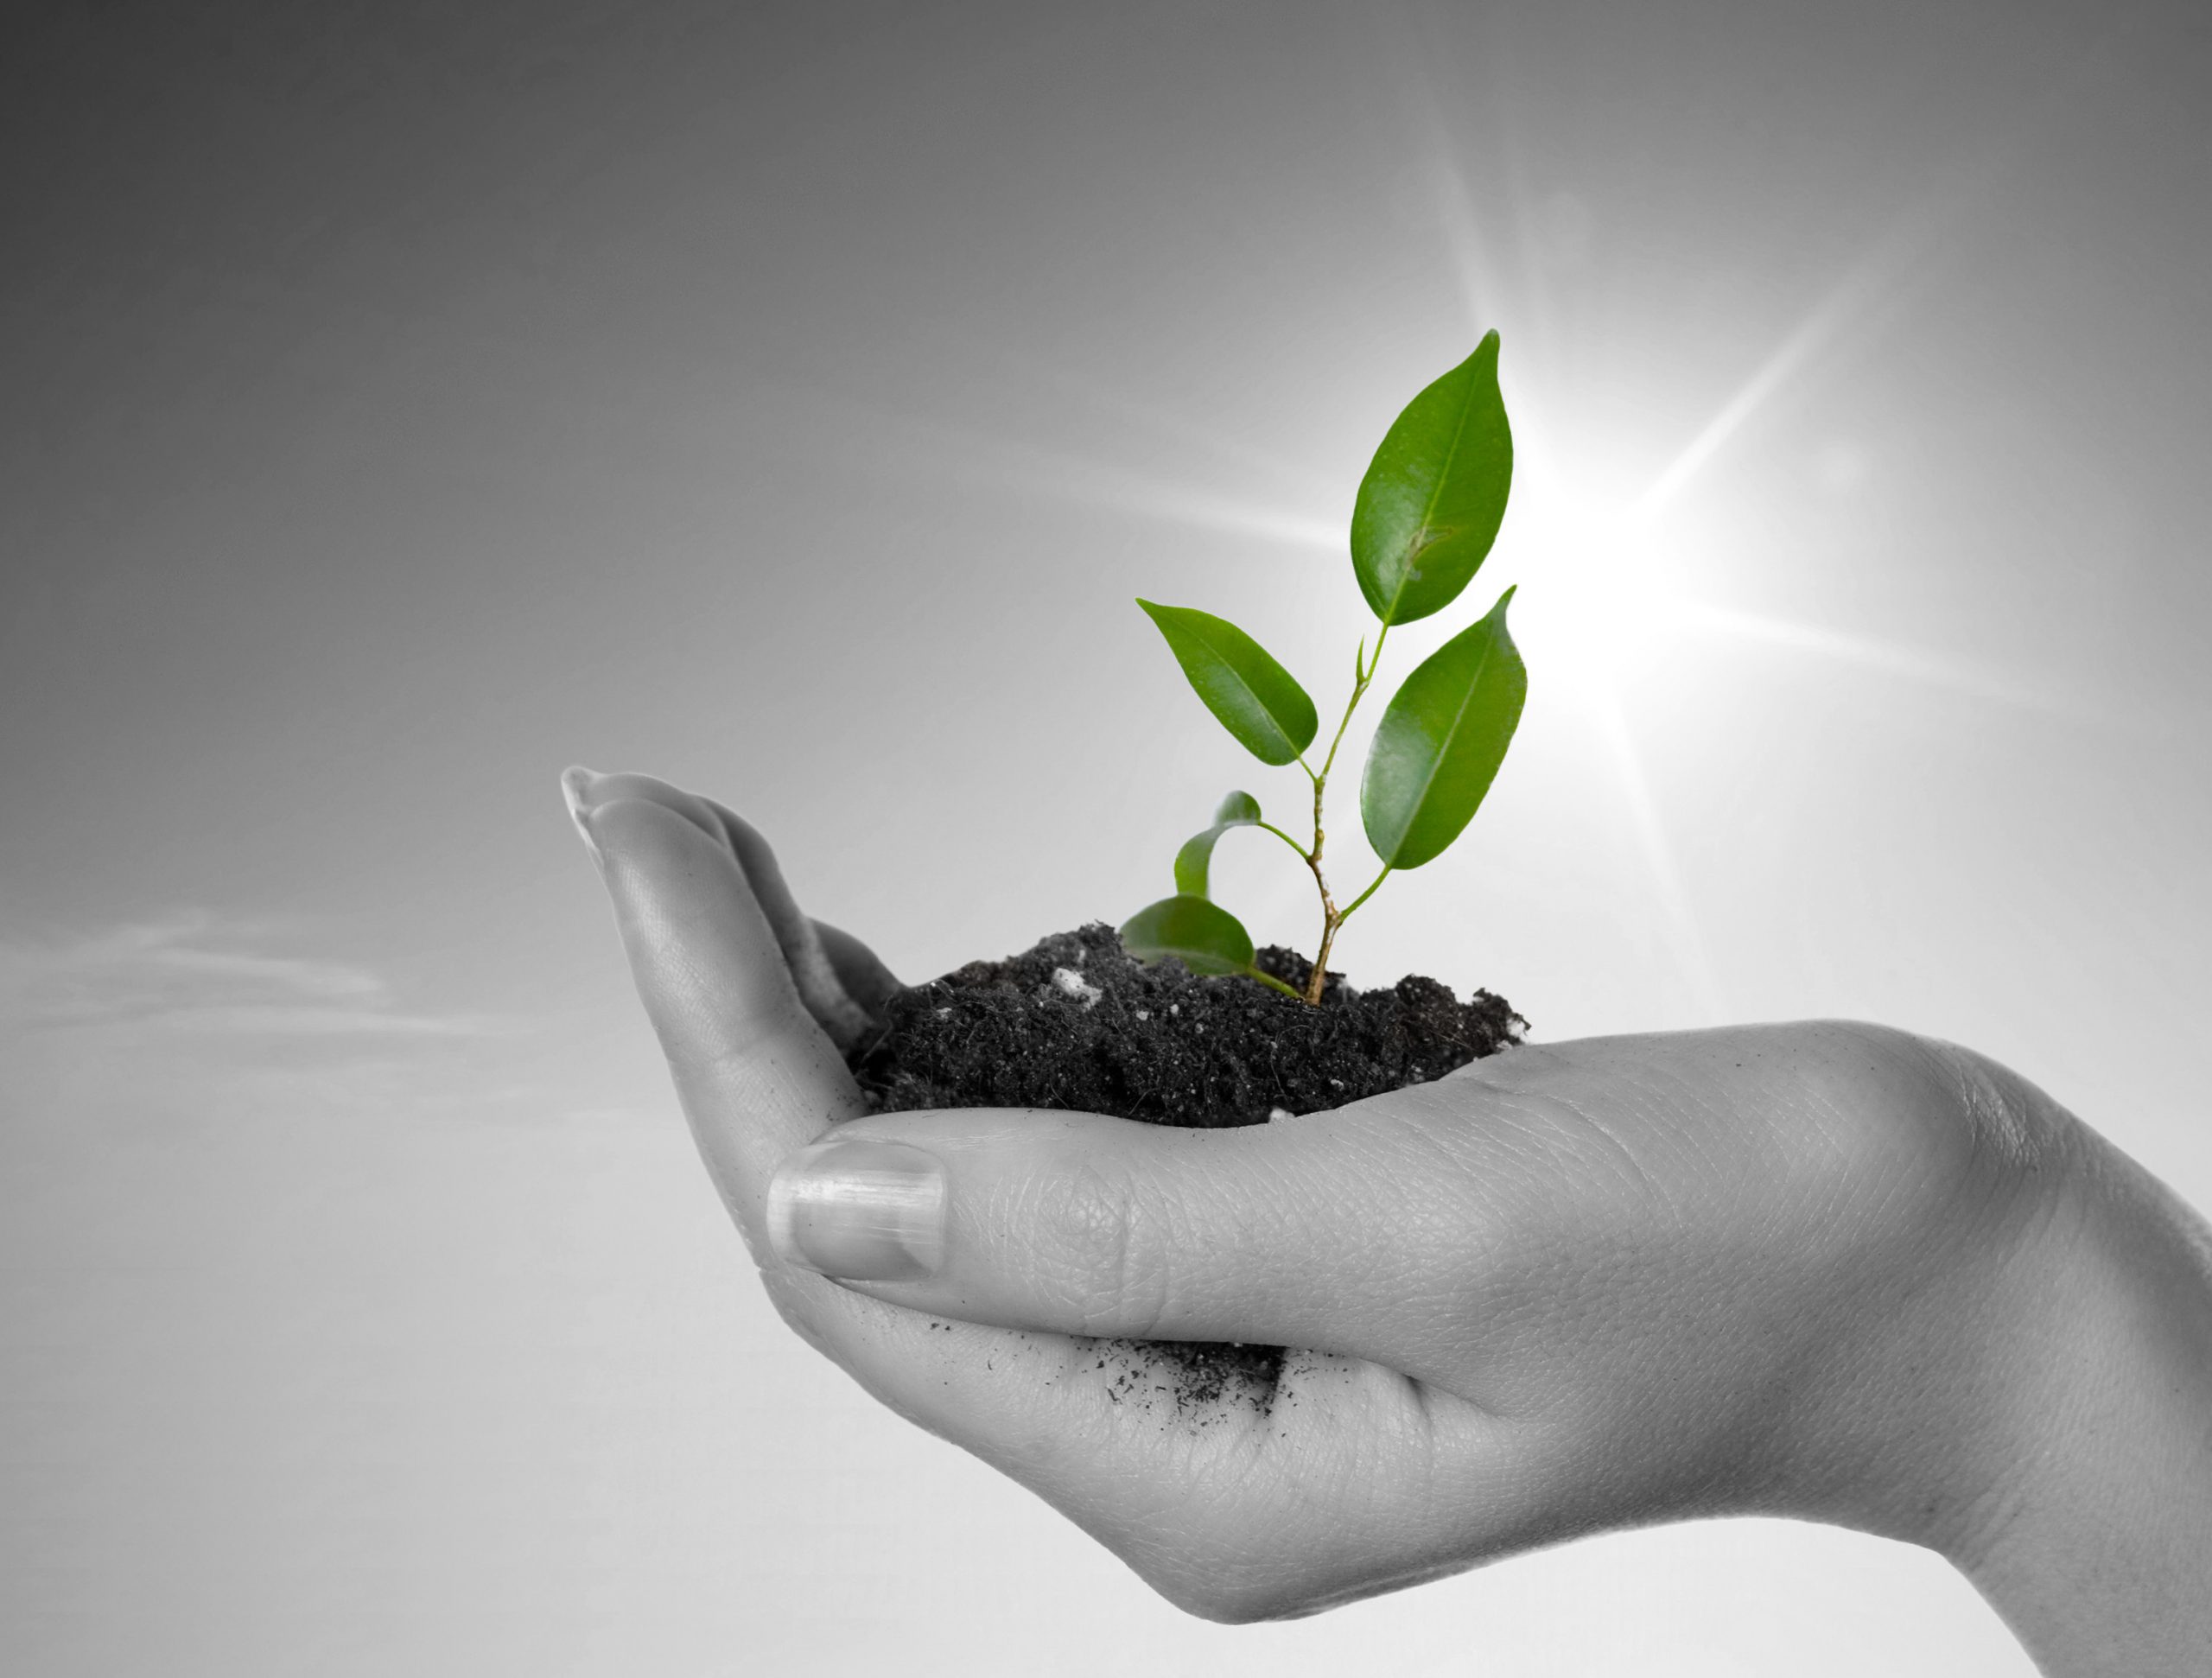 Nutreco launches new sustainability programme. Photo: Dreamstime